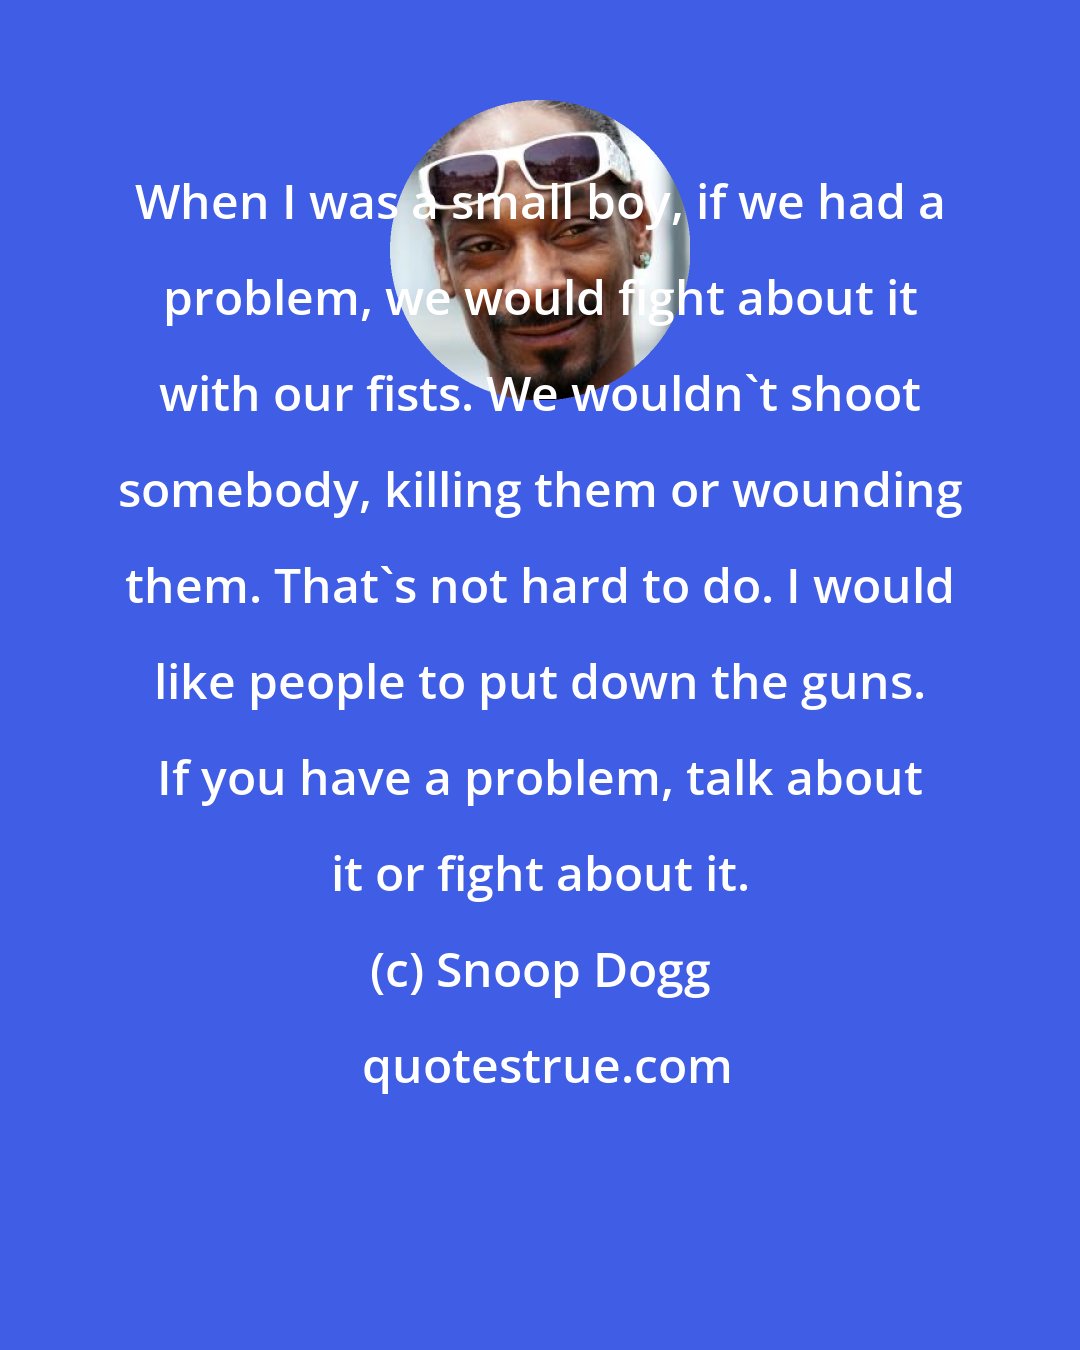 Snoop Dogg: When I was a small boy, if we had a problem, we would fight about it with our fists. We wouldn't shoot somebody, killing them or wounding them. That's not hard to do. I would like people to put down the guns. If you have a problem, talk about it or fight about it.